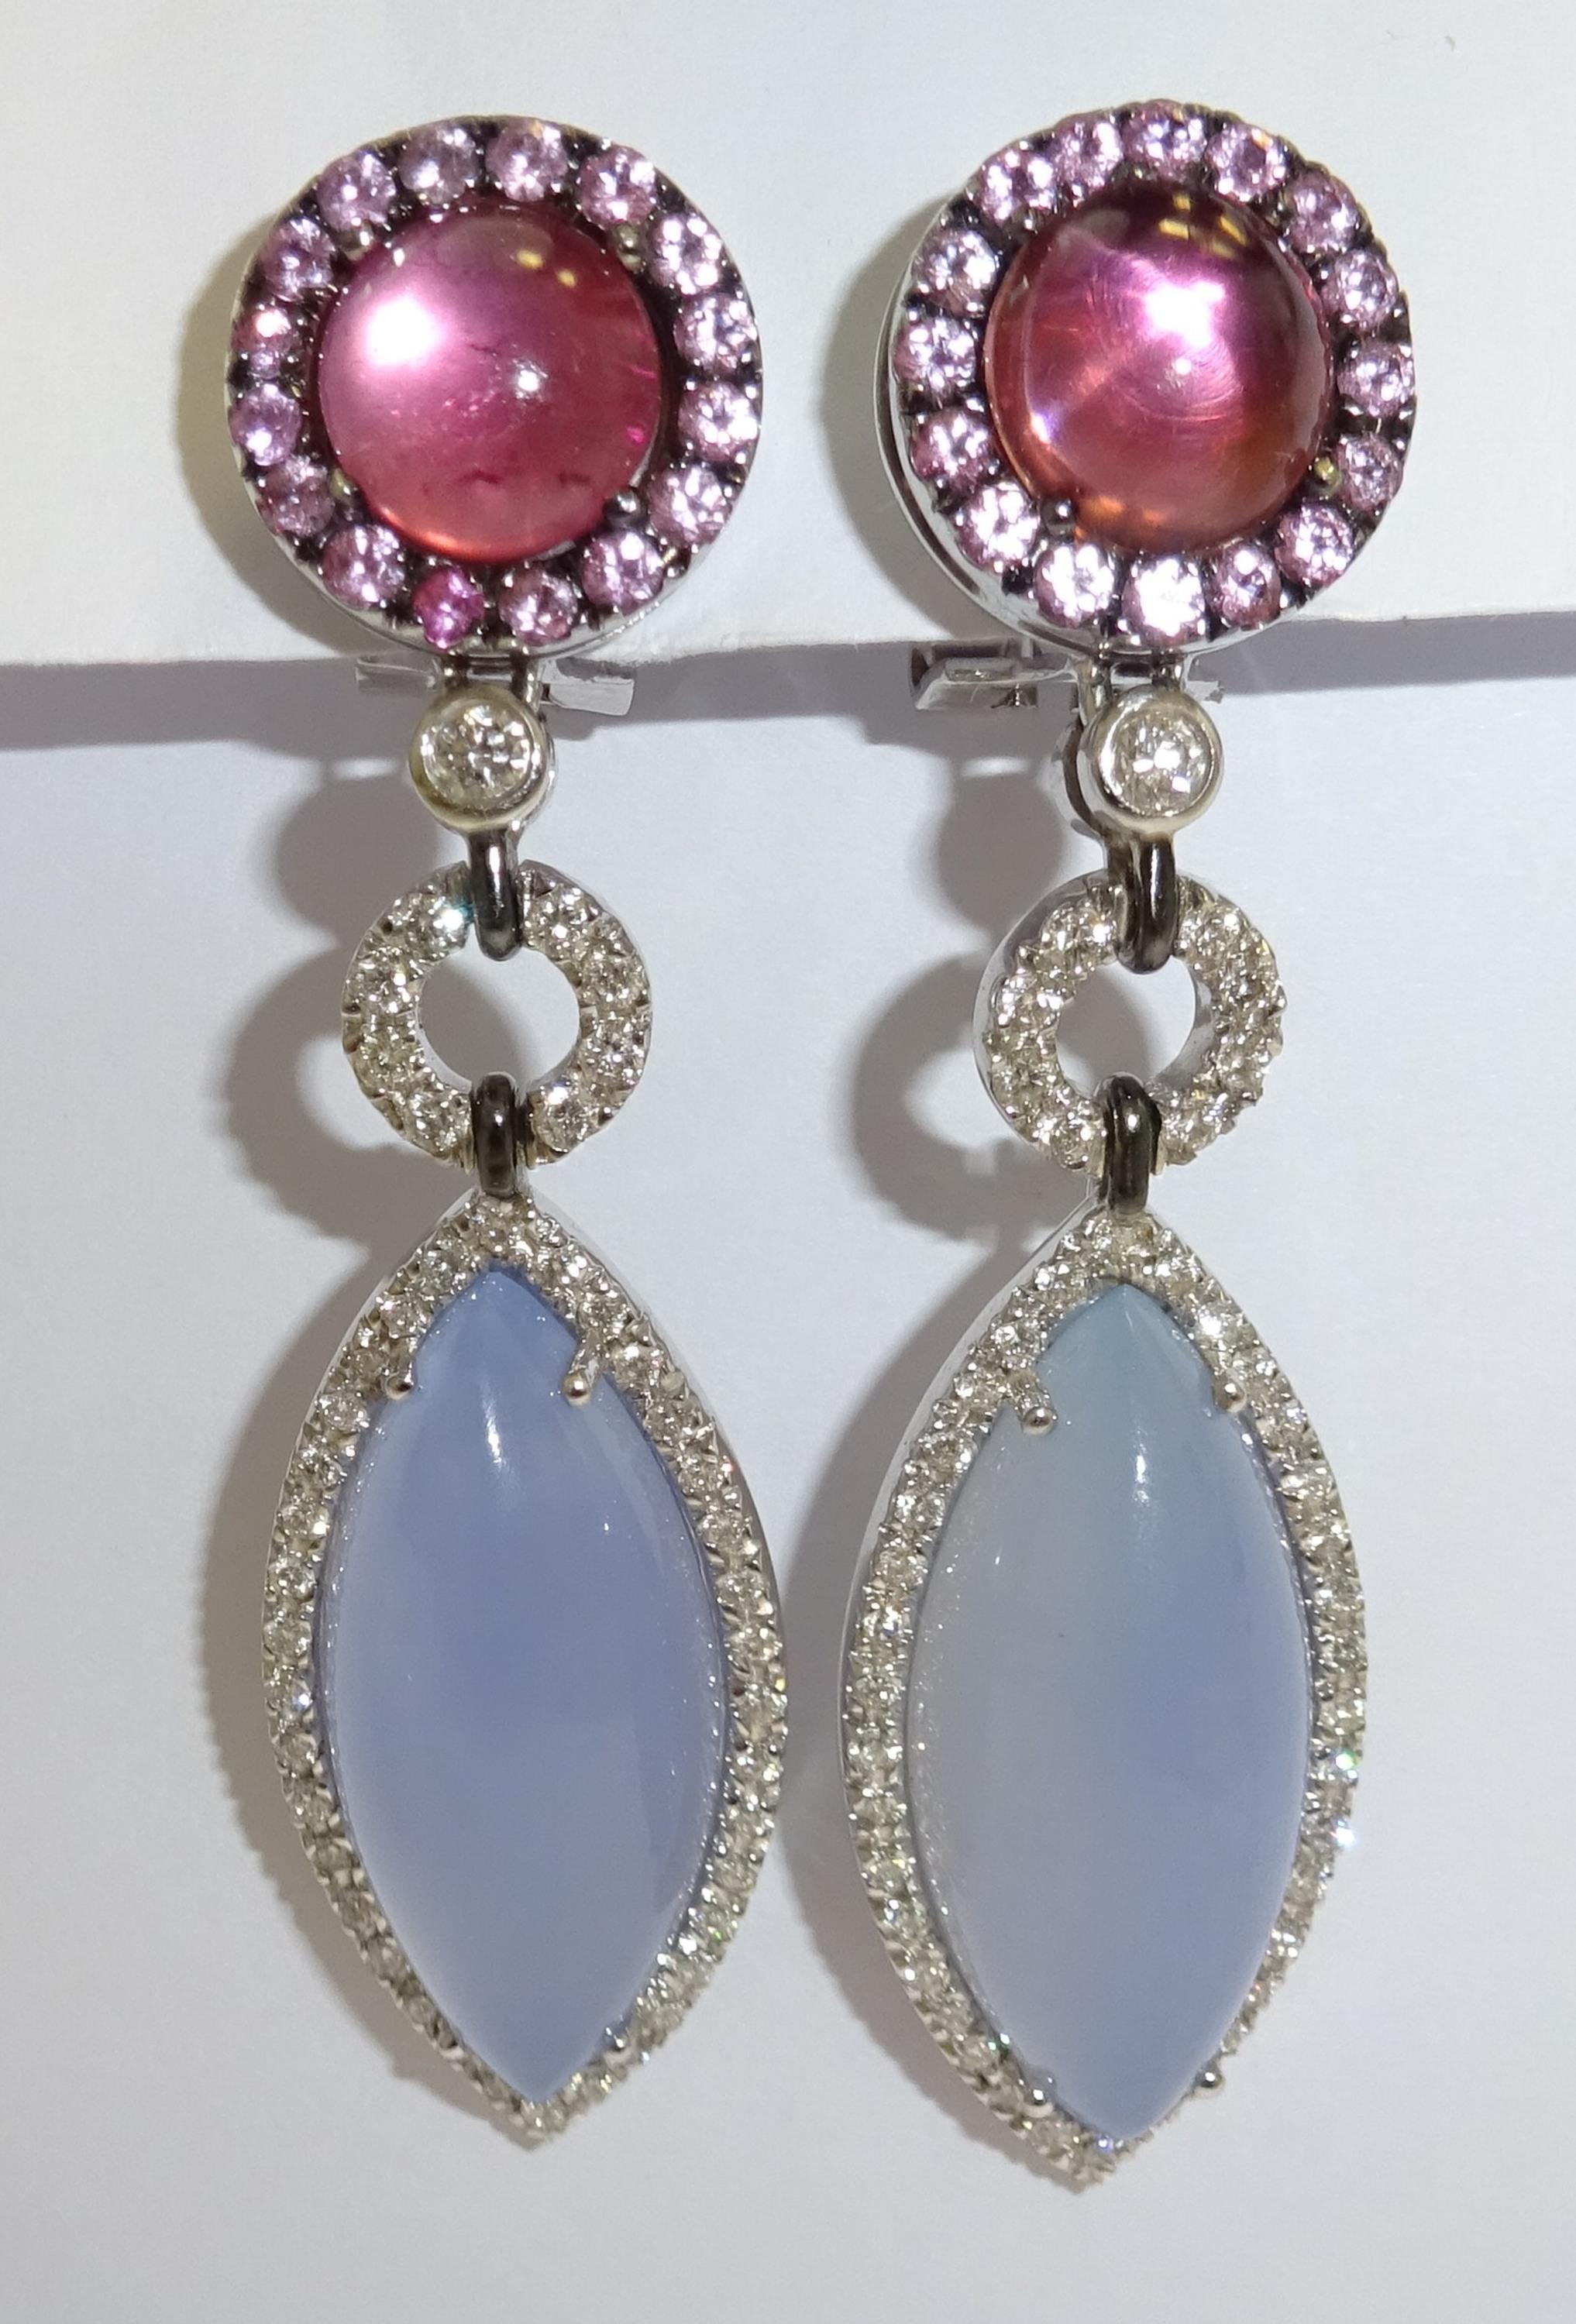 A magnificent pair of contemporary Diamond, Turmaline and Tanzanite drop Earrings. The earrings are mounted in 18 Karat white gold encrusted with vidid and truly stunning oval gemstones. These sensational earrings epitomize elegance and